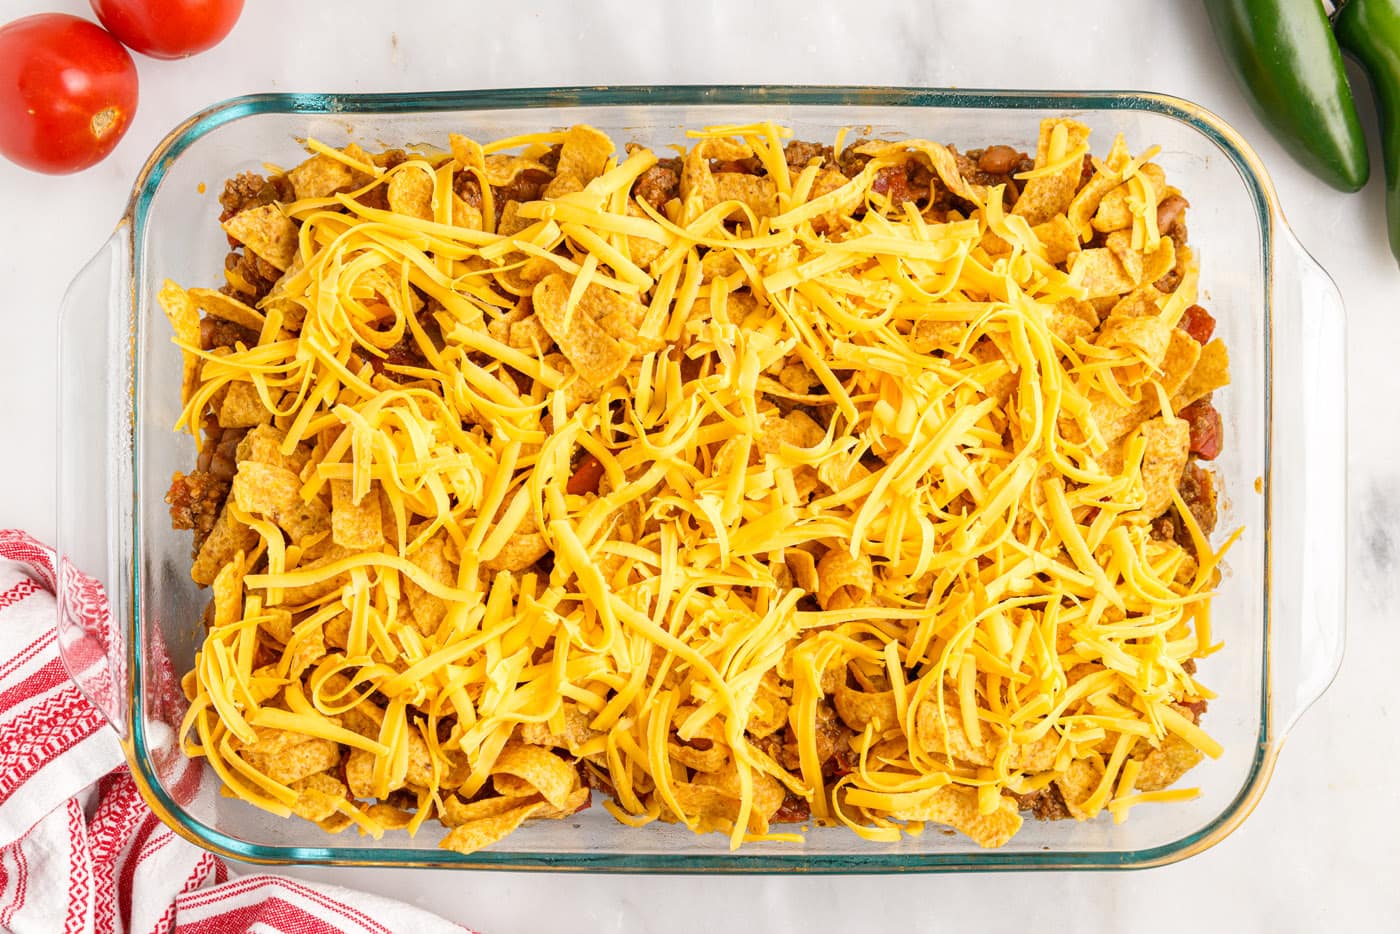 chips and cheese on top of meat mixture in a casserole dish